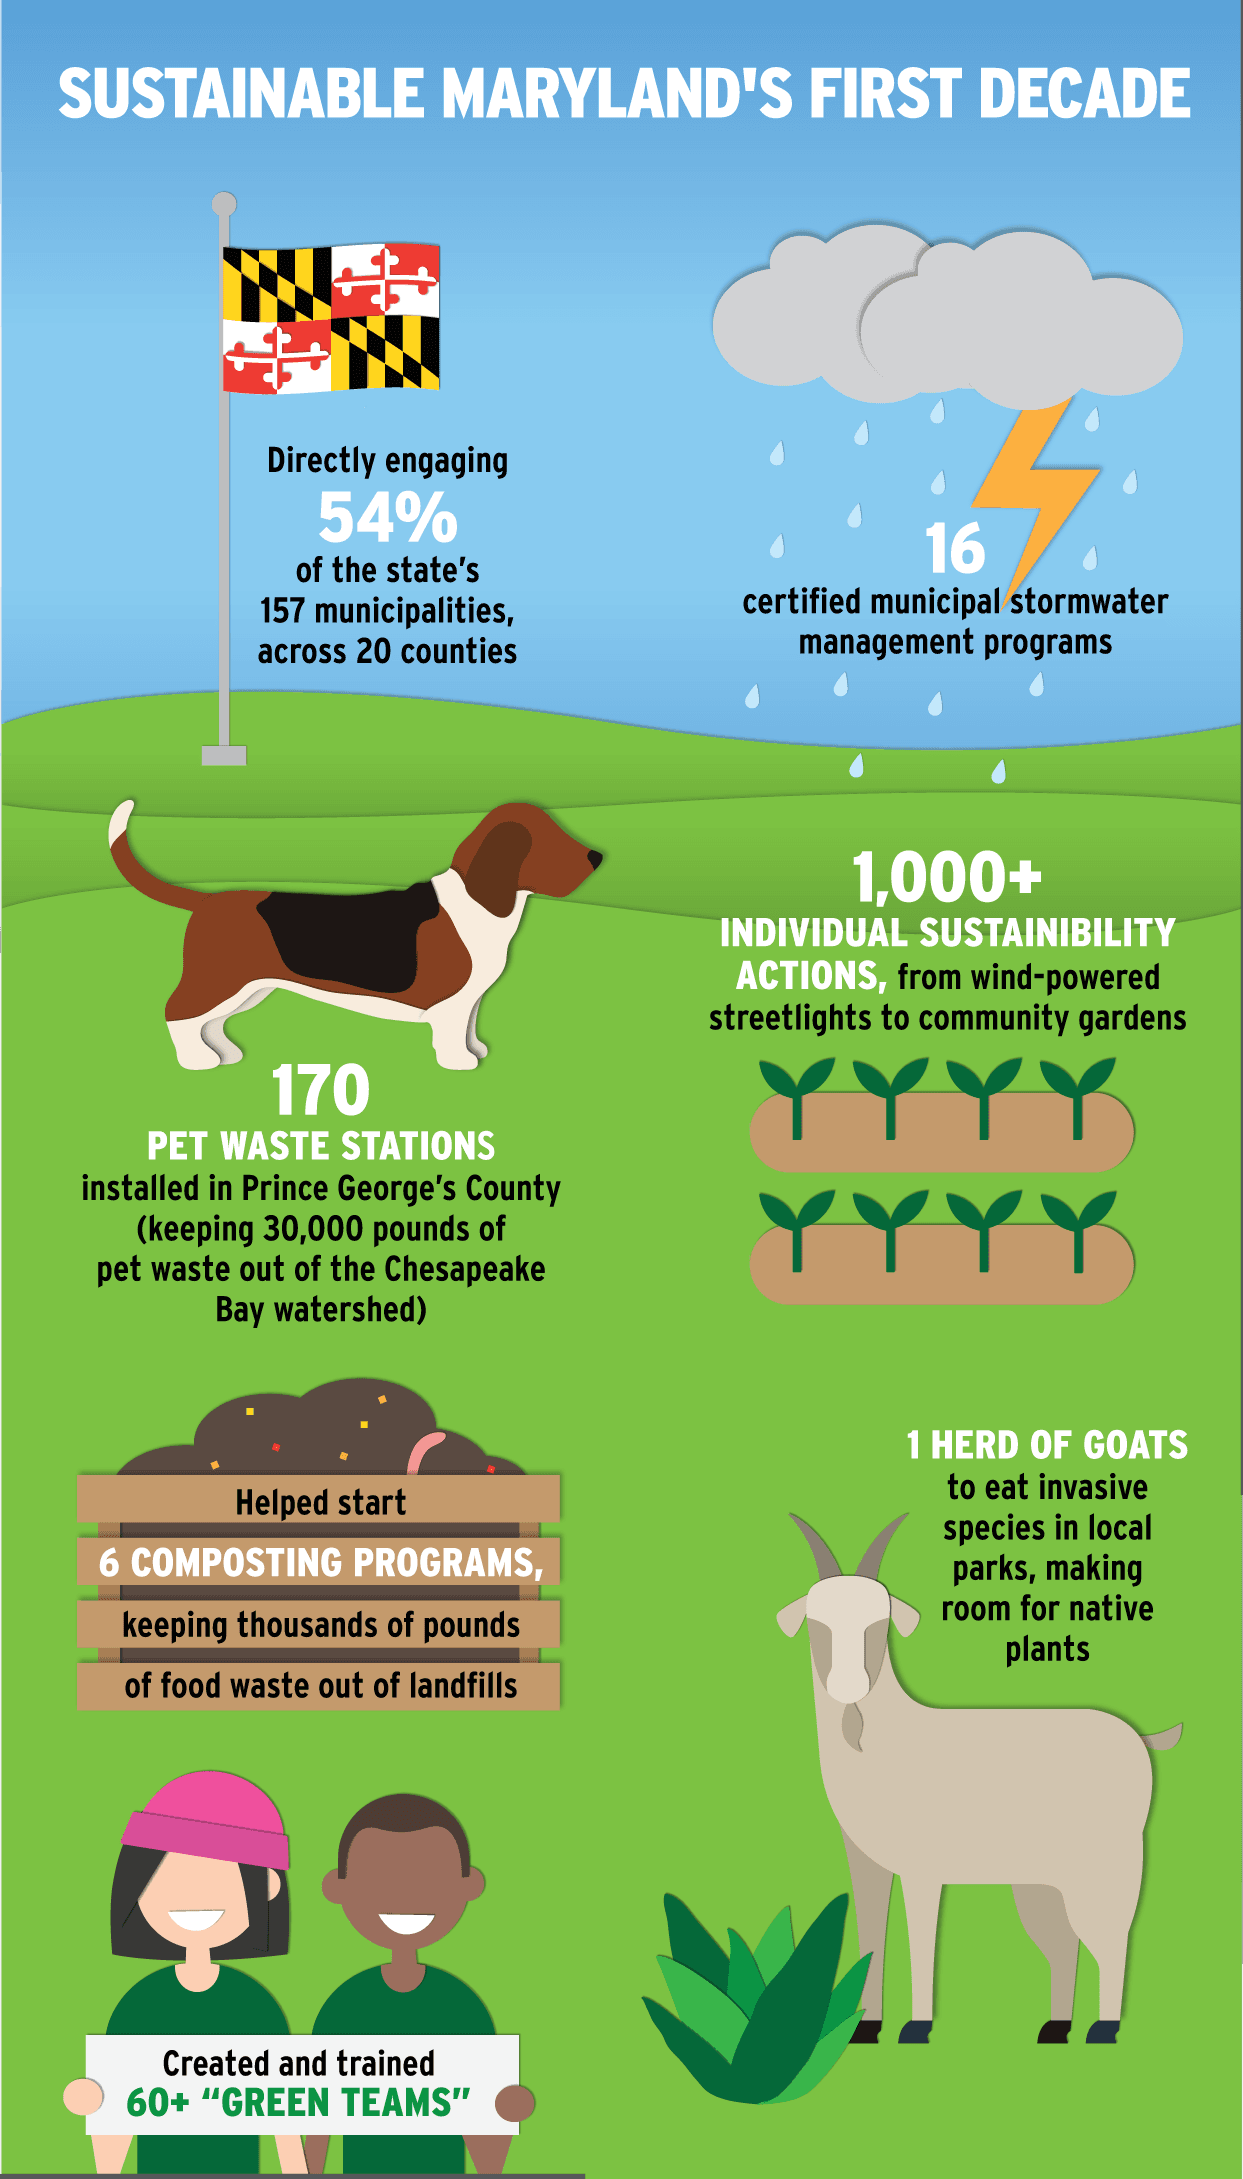 Sustainable Maryland's First Decade: Directly engaging 53% of the state's 157 municipalities, across 20 counties; 16 certified municipal stormwater management programs; 170 pet waste stations installed in Prince George's County (keeping 30,000 pounds of pet waste out of the Chesapeake Bay watershed; 1,000+ individual sustainability actions, from wind-powered streetlights to community gardens; helped start 6 composting programs, keeping thousands of pounds of food waste out of landfills; 1 herd of goats to eat invasive species in local parks, making room for native plants; created and trained 60+ "green teams"